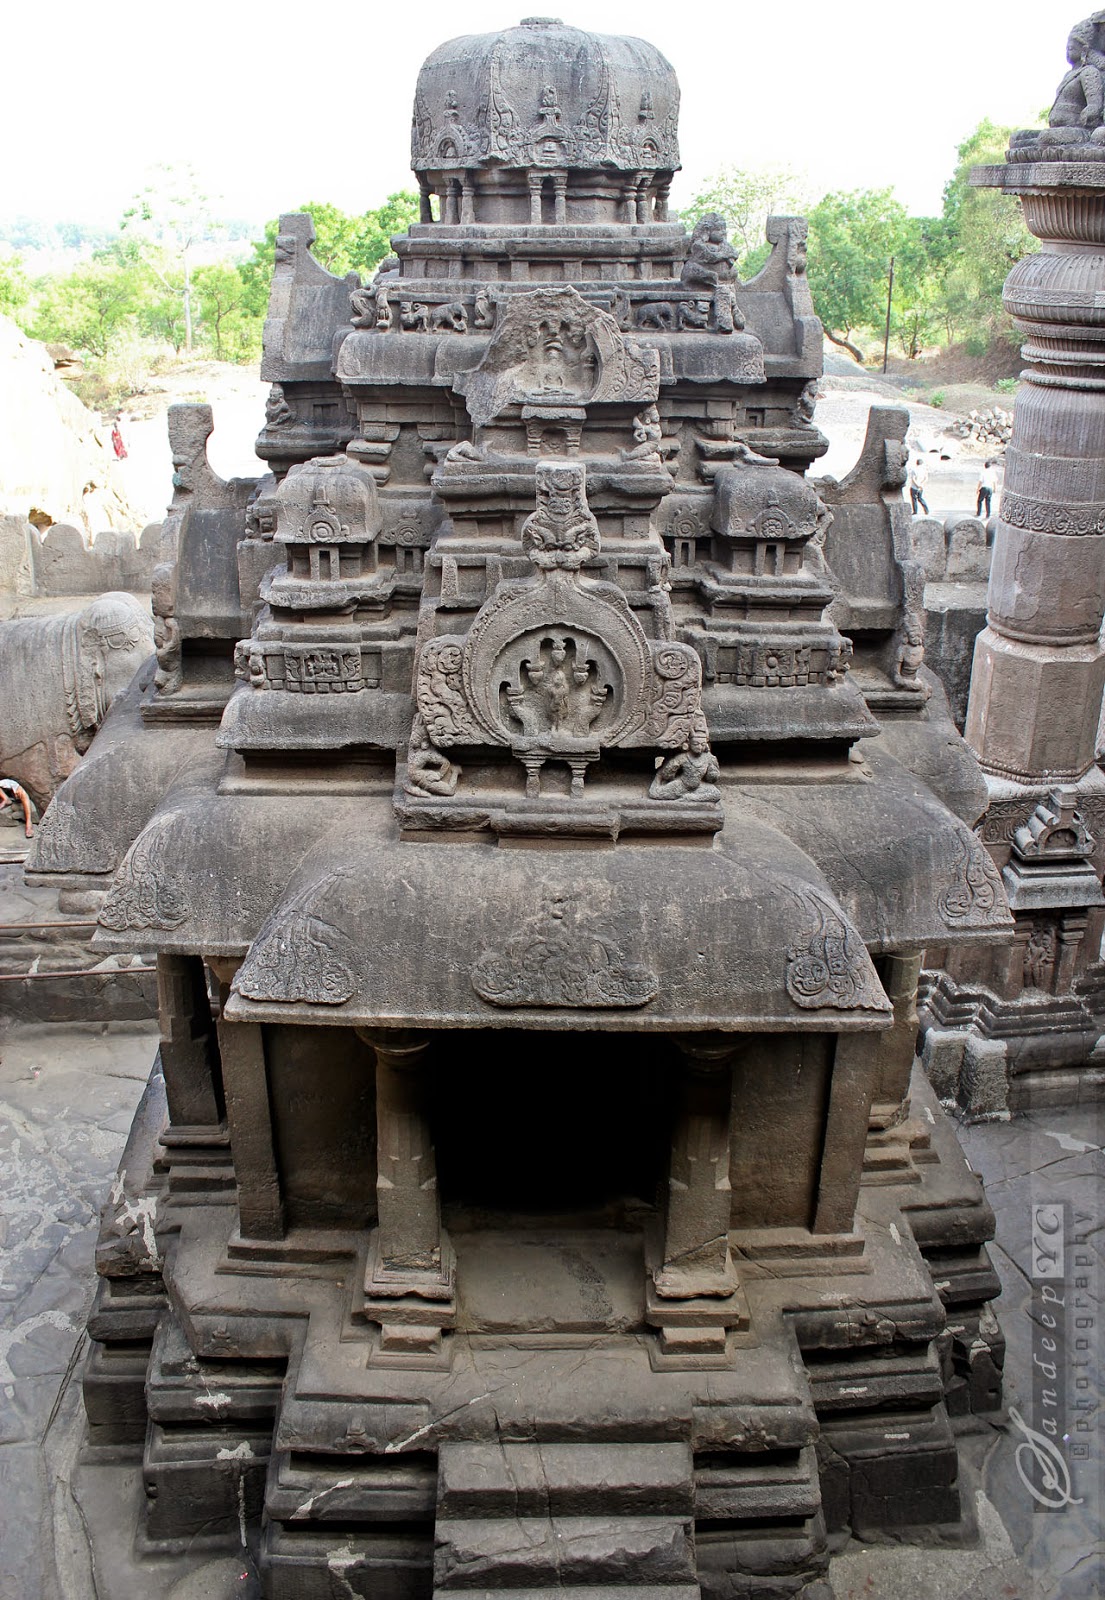 exquisitely carved monolithic shrine at the center of the courtyard